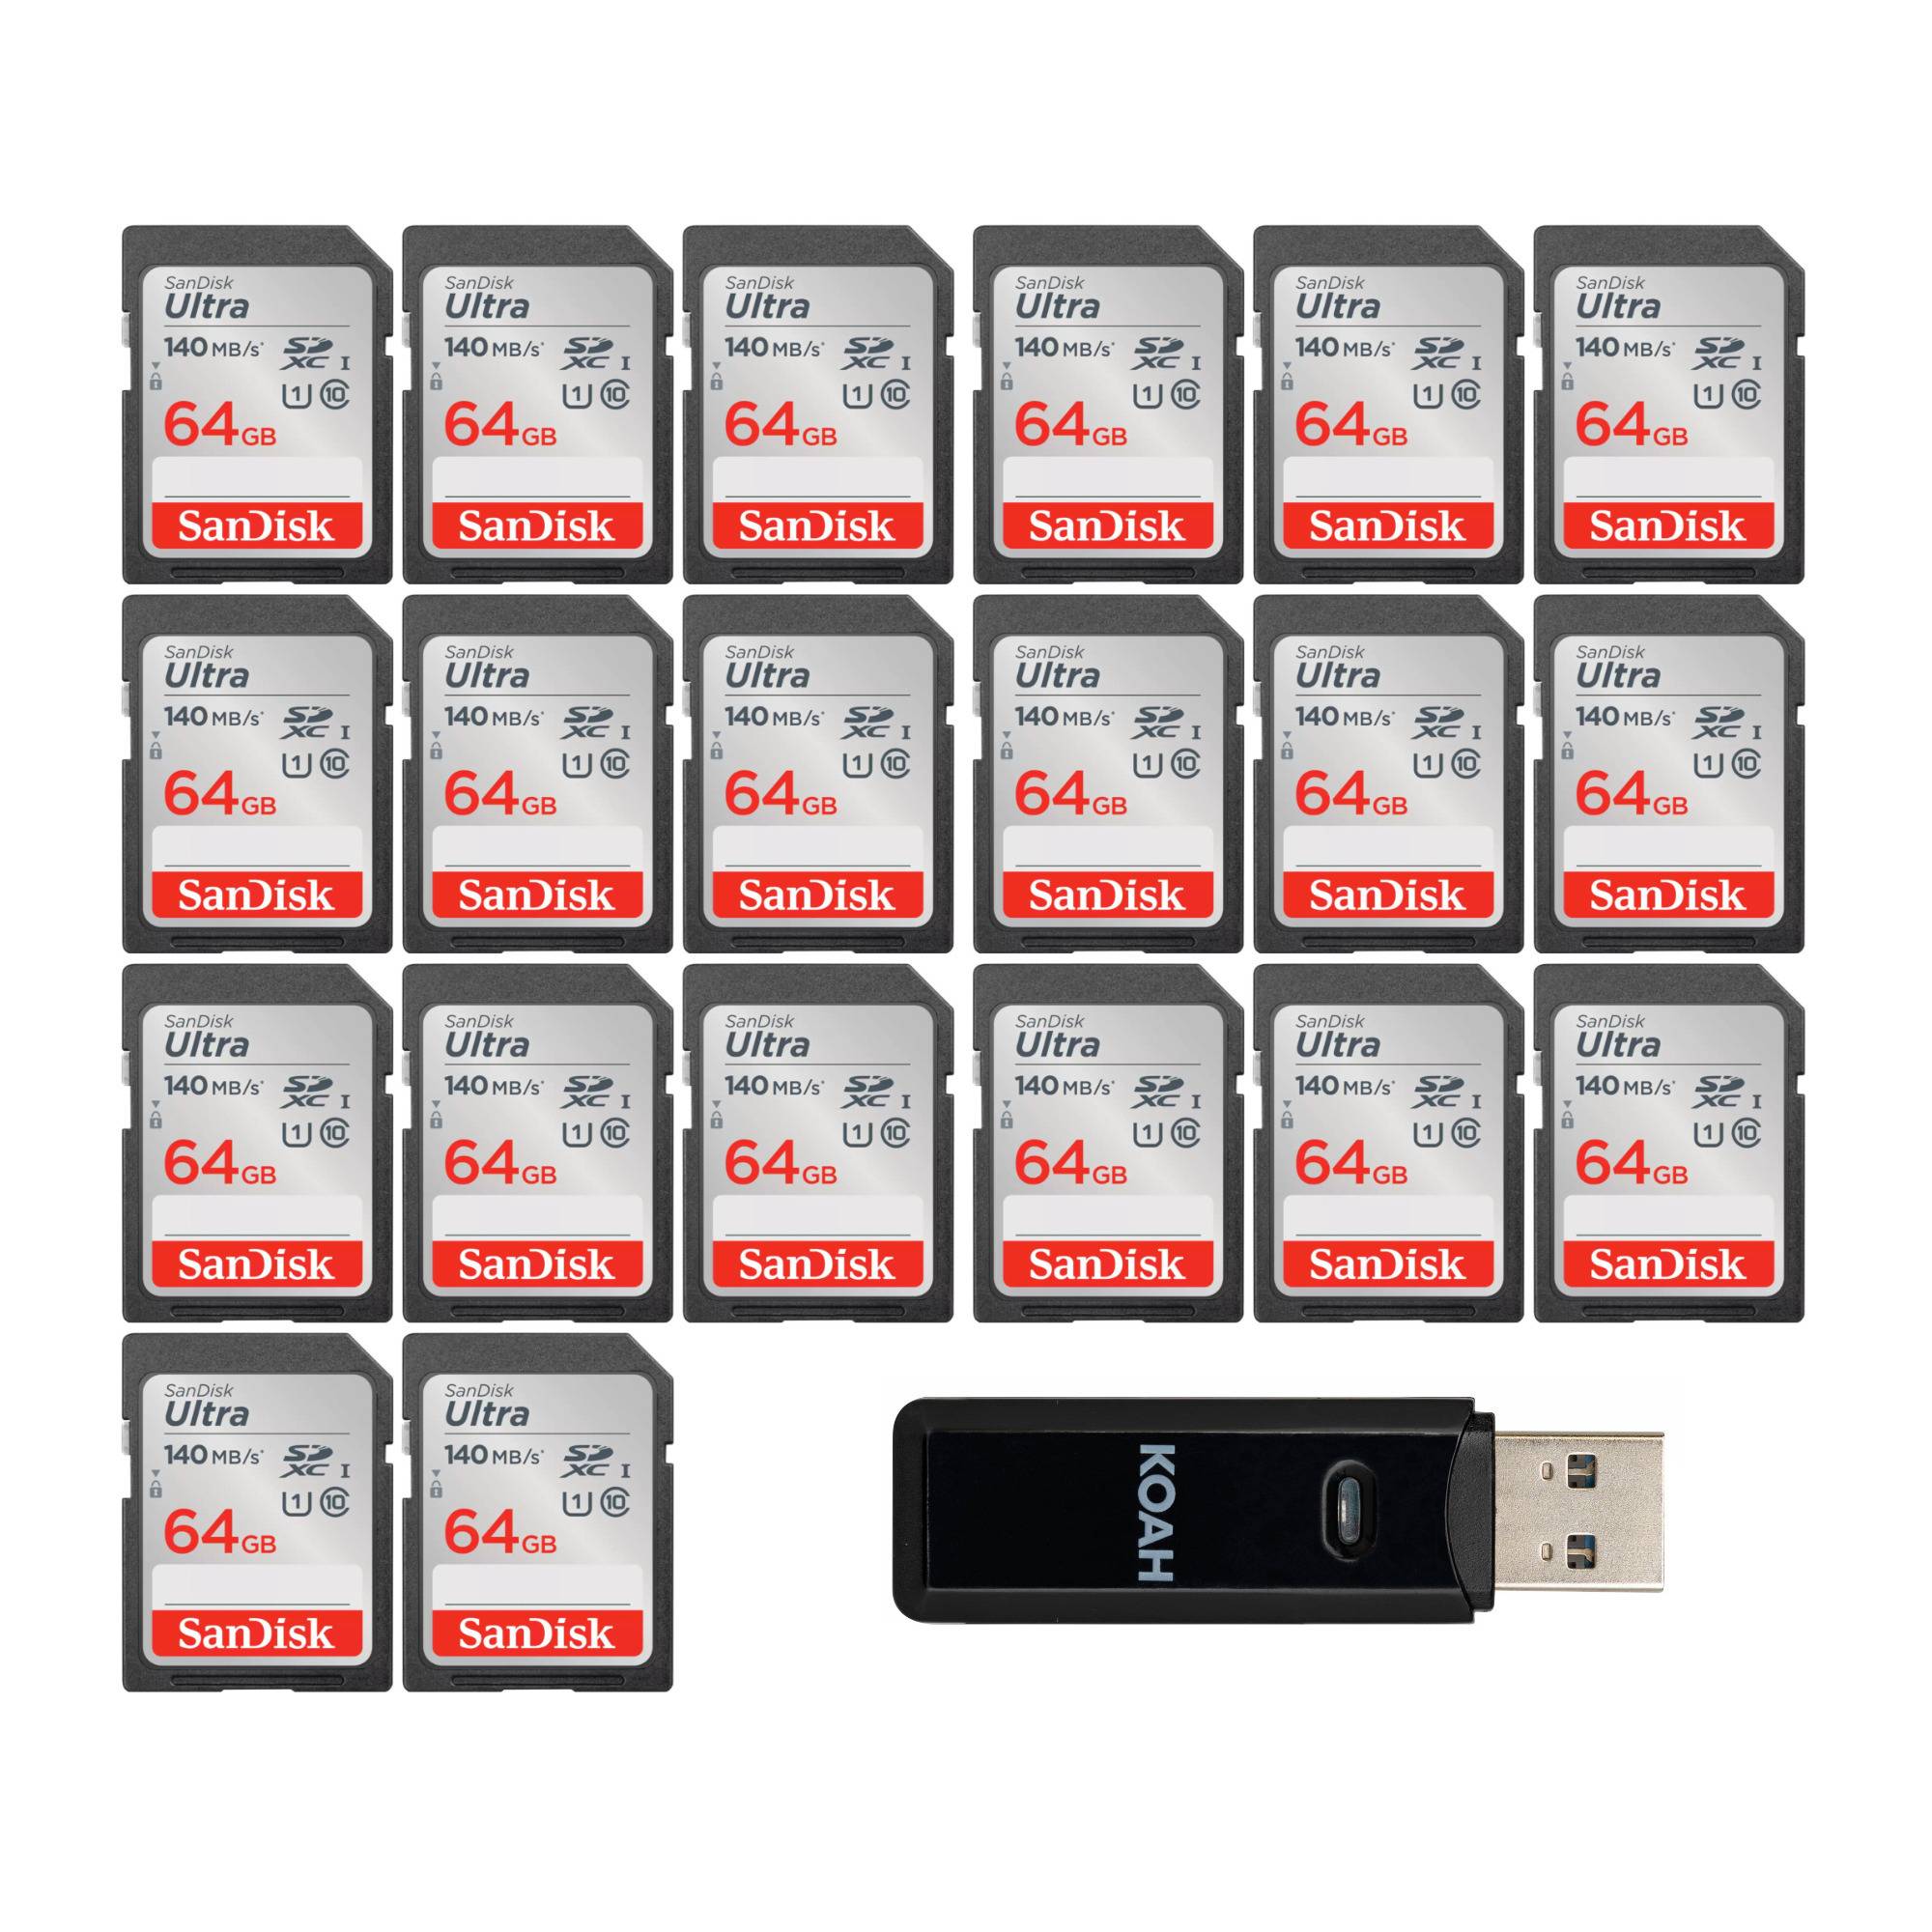 SanDisk 64GB Ultra 140 MB/s UHS-I SDXC Memory Card (20-pack) with 2-in-1 USB 3.0 Memory Card Reader